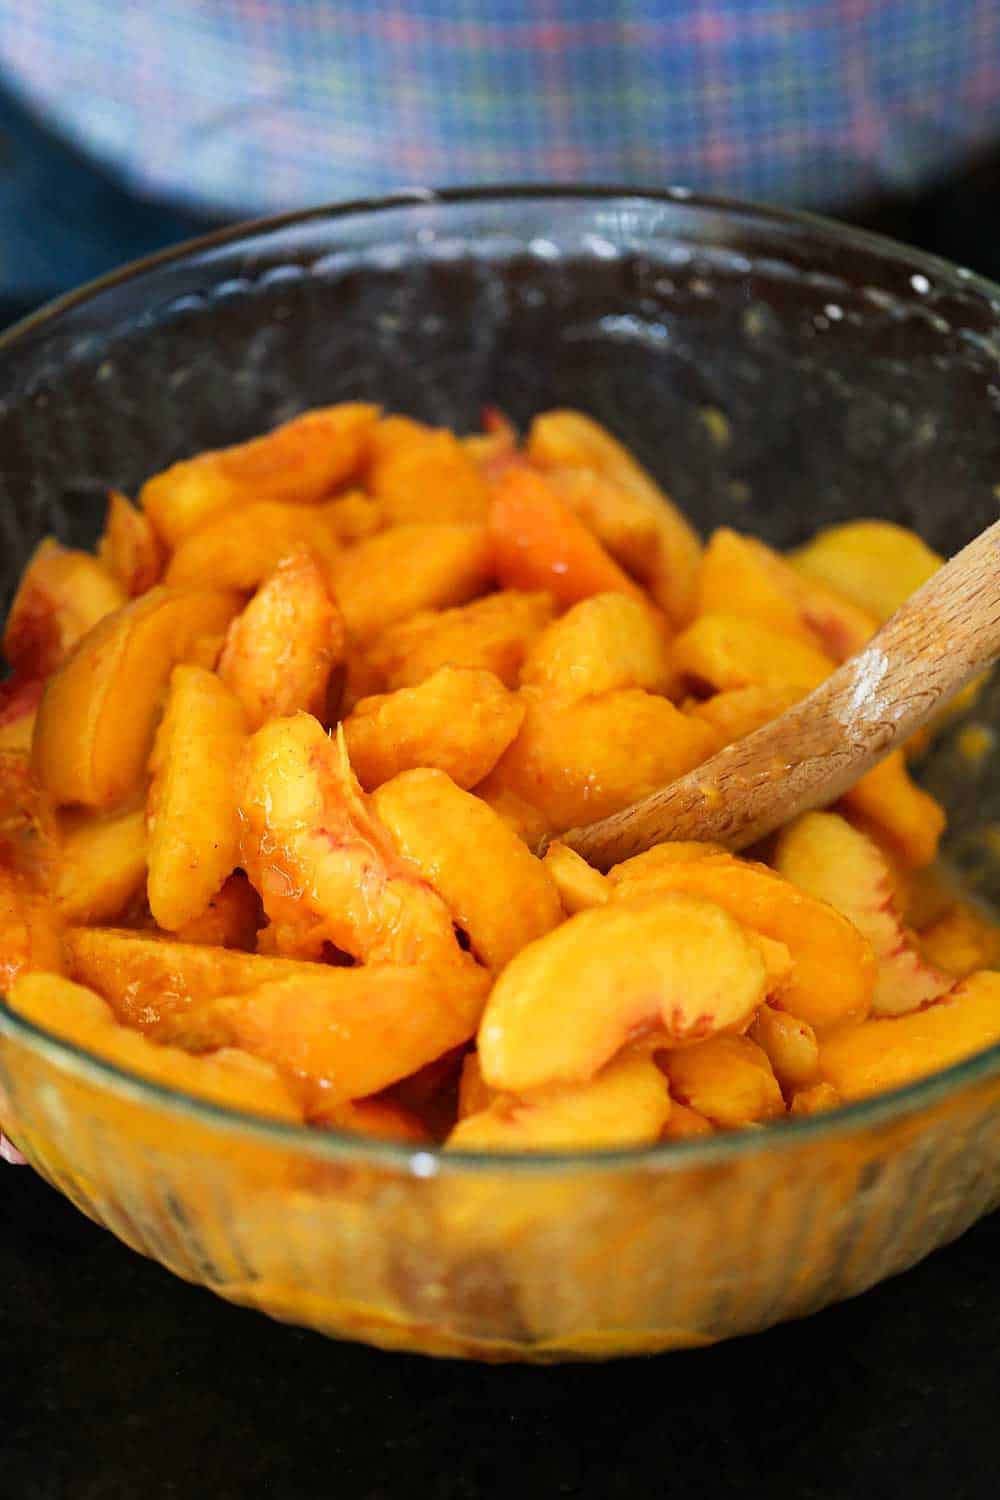 A large glass bowl filled with sliced fresh peaches with a wooden spoon inserted on the edge of the bowl.